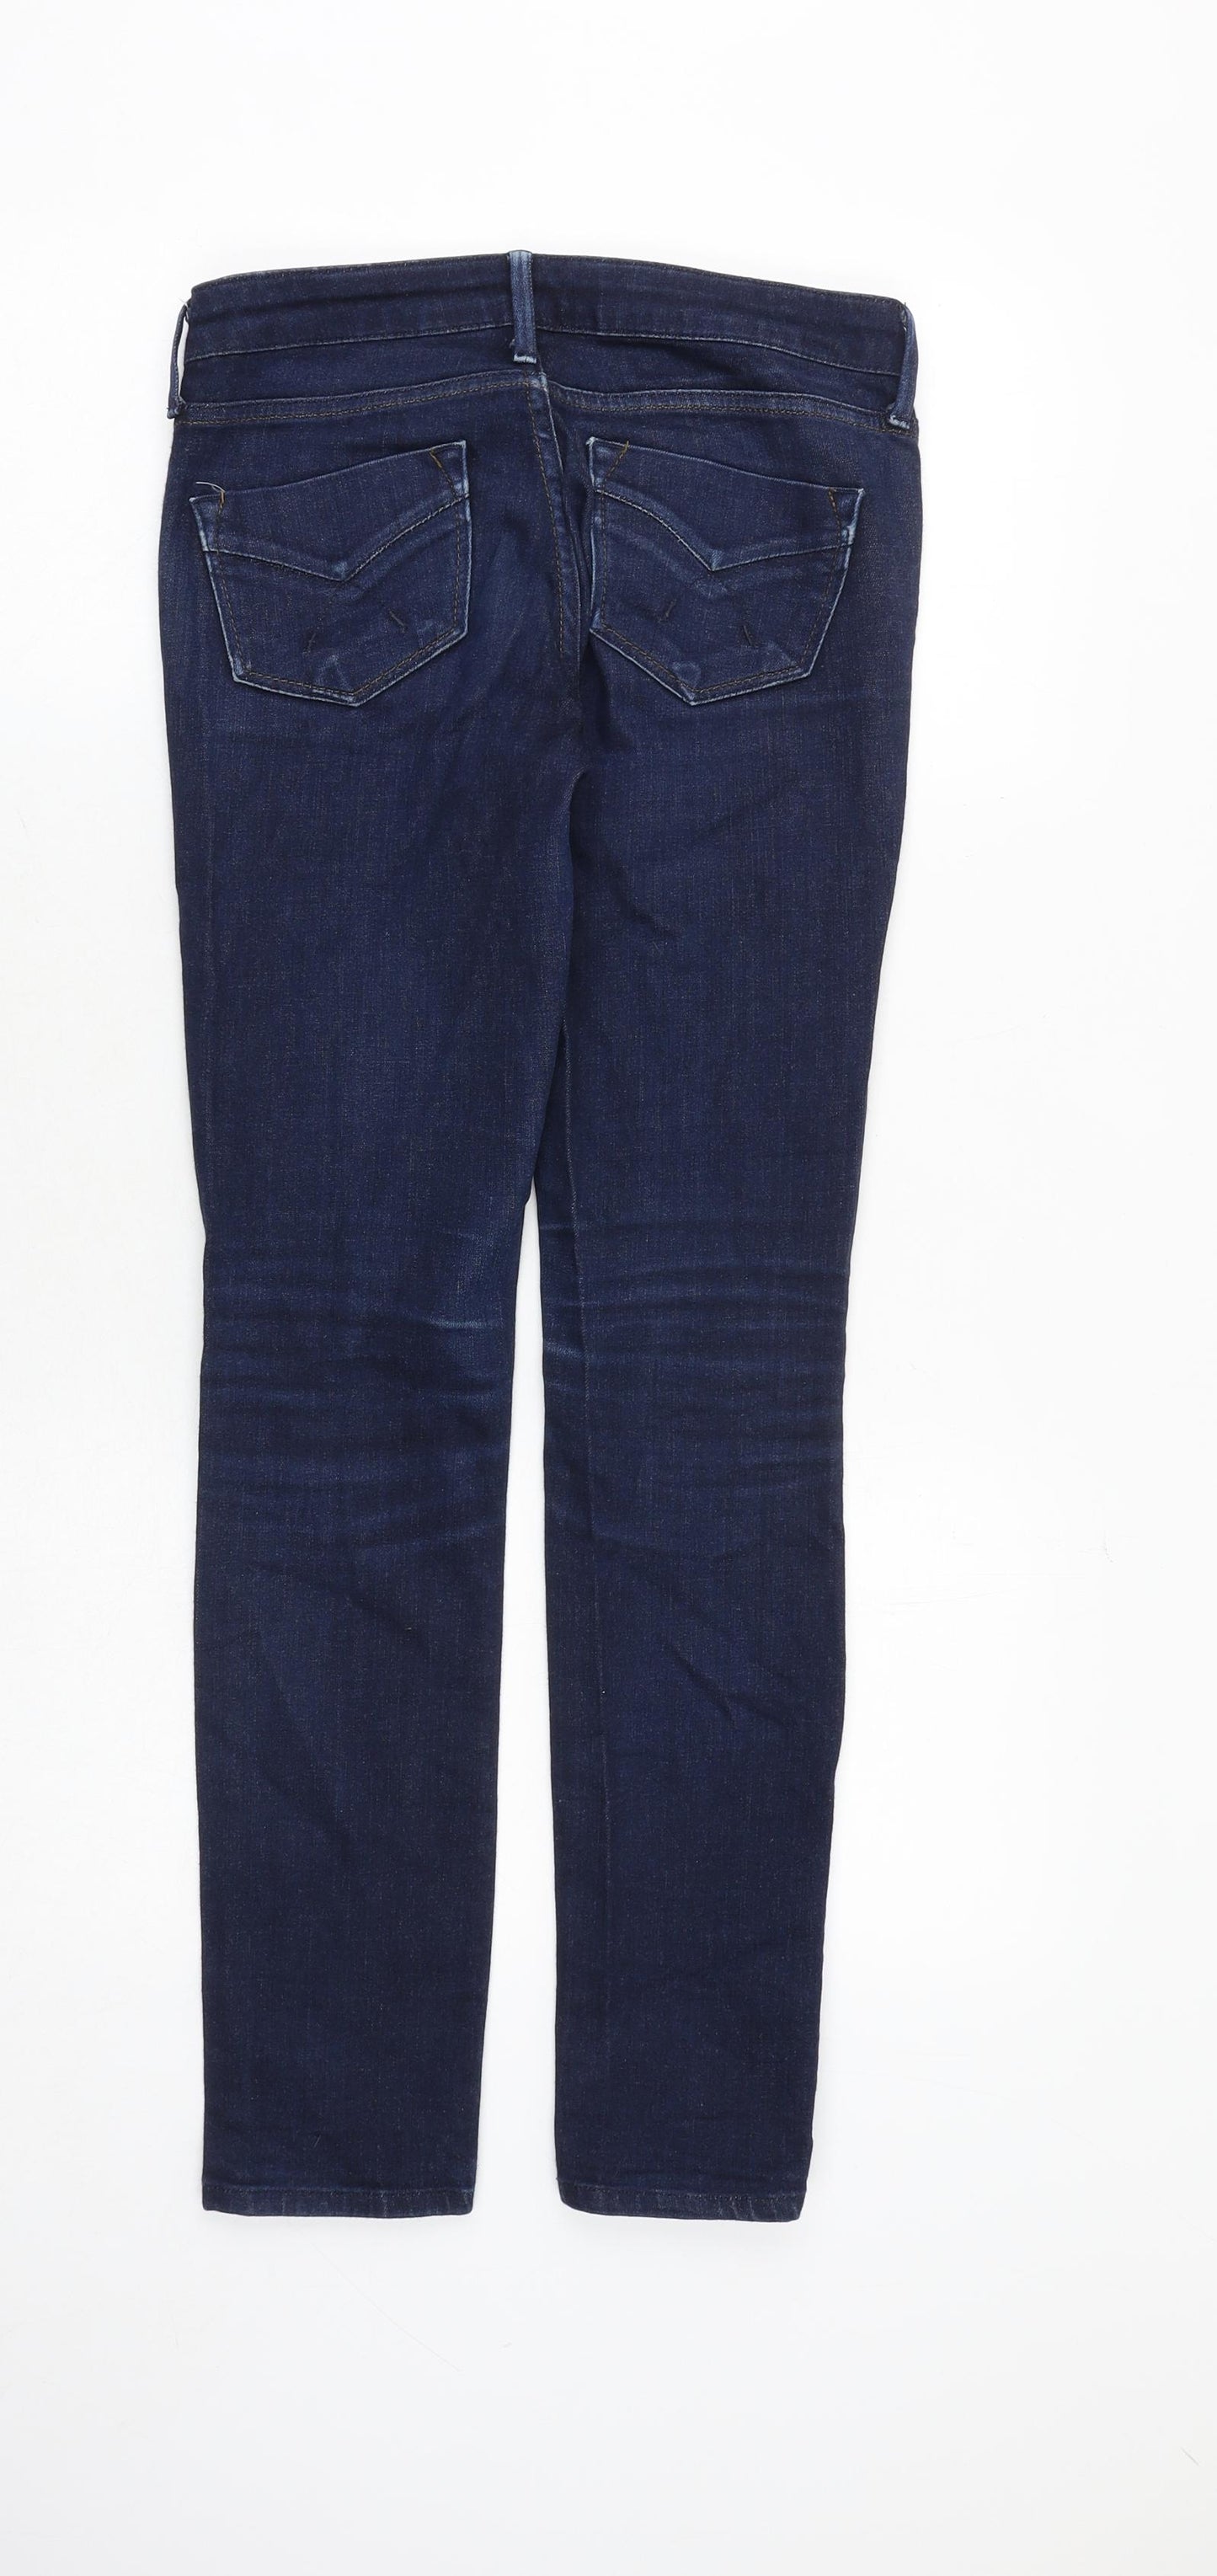 Topshop Womens Blue Cotton Skinny Jeans Size 26 in L30 in Regular Zip